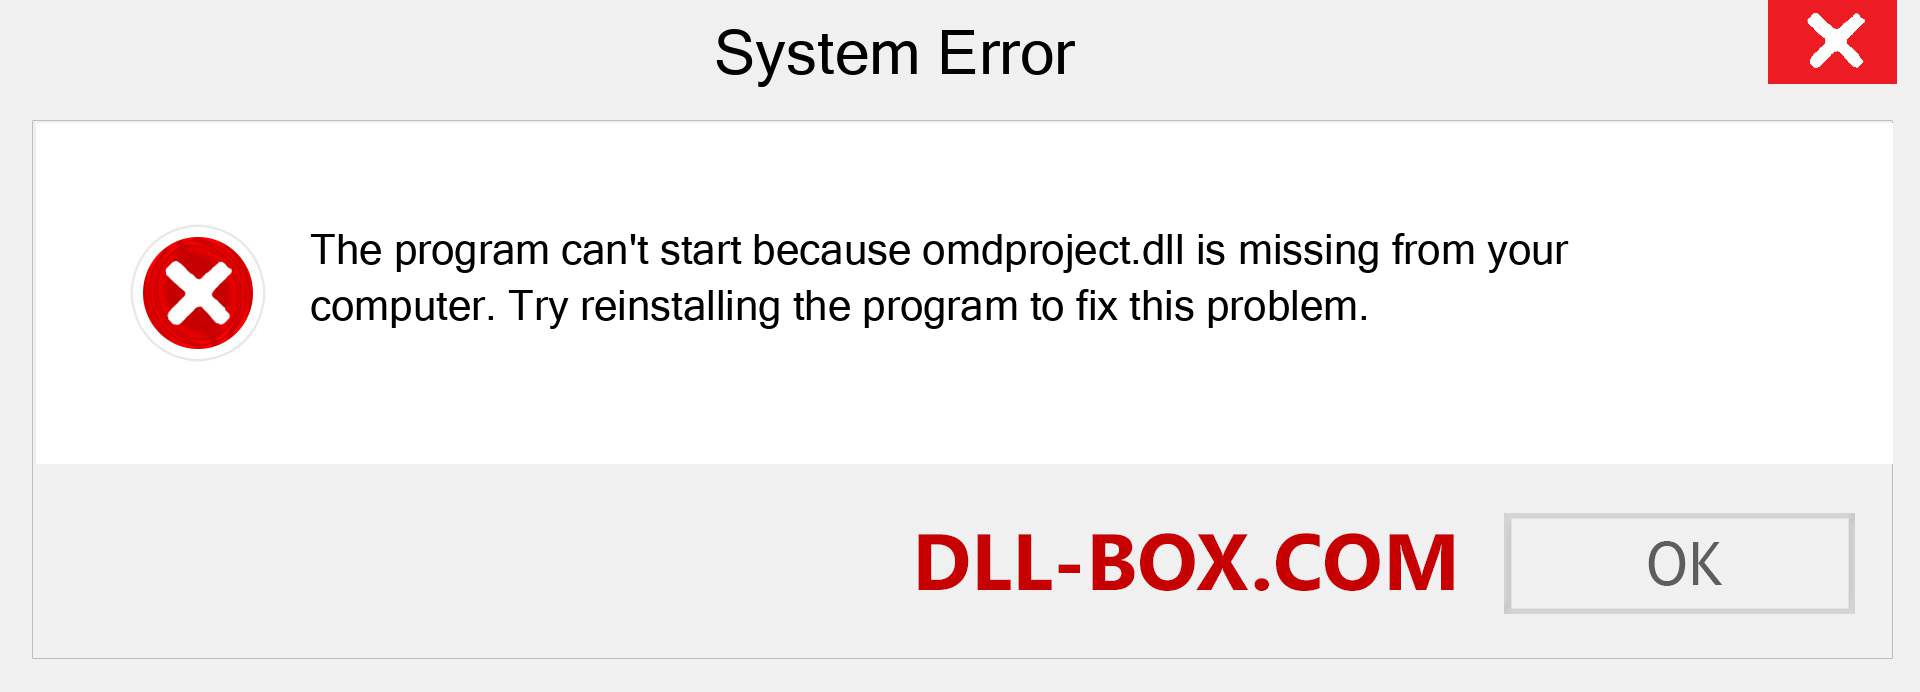  omdproject.dll file is missing?. Download for Windows 7, 8, 10 - Fix  omdproject dll Missing Error on Windows, photos, images